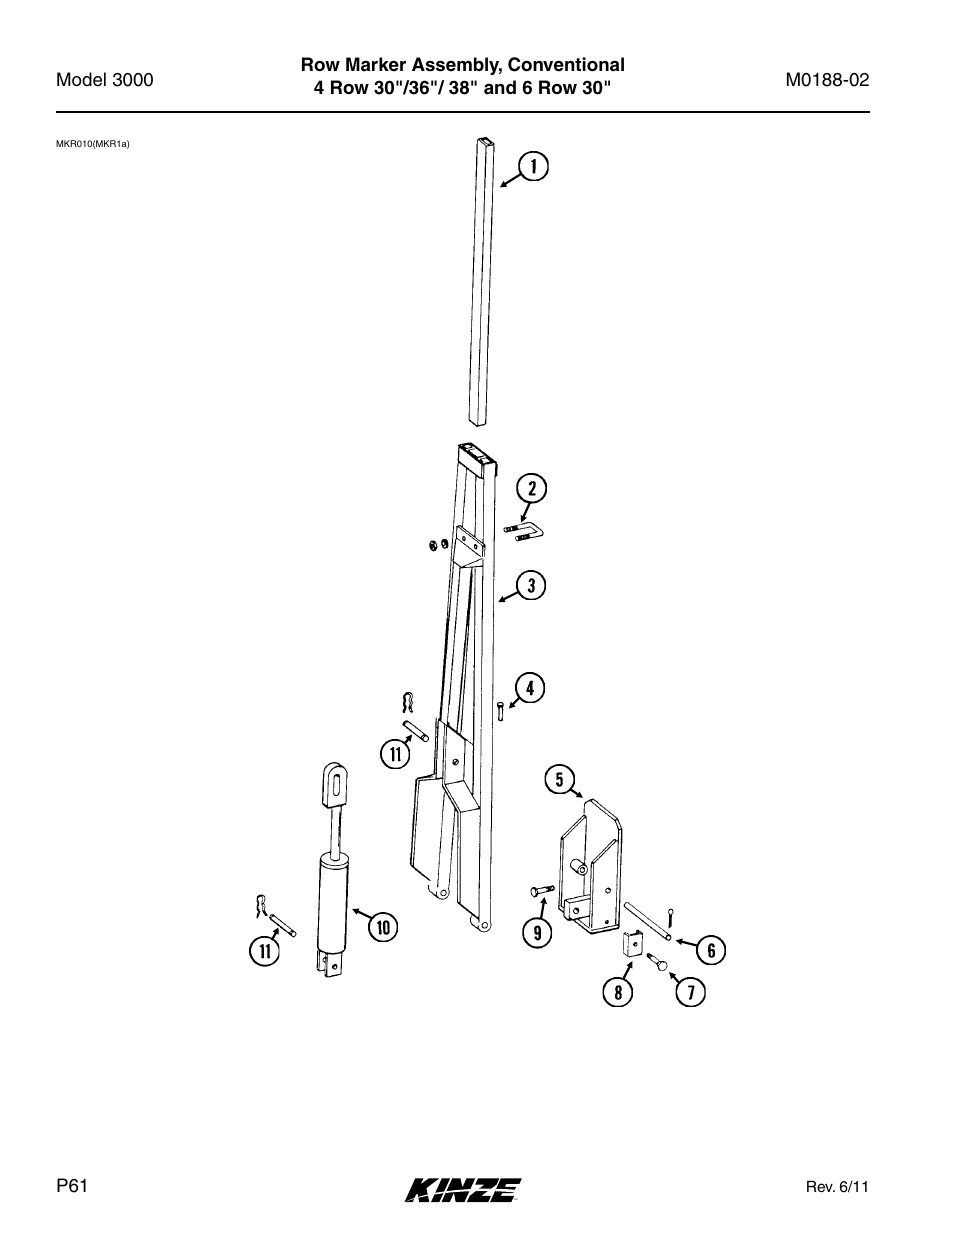 Row marker assembly, conventional | Kinze 3000 Rigid Frame Planter Rev. 5/14 User Manual | Page 64 / 154